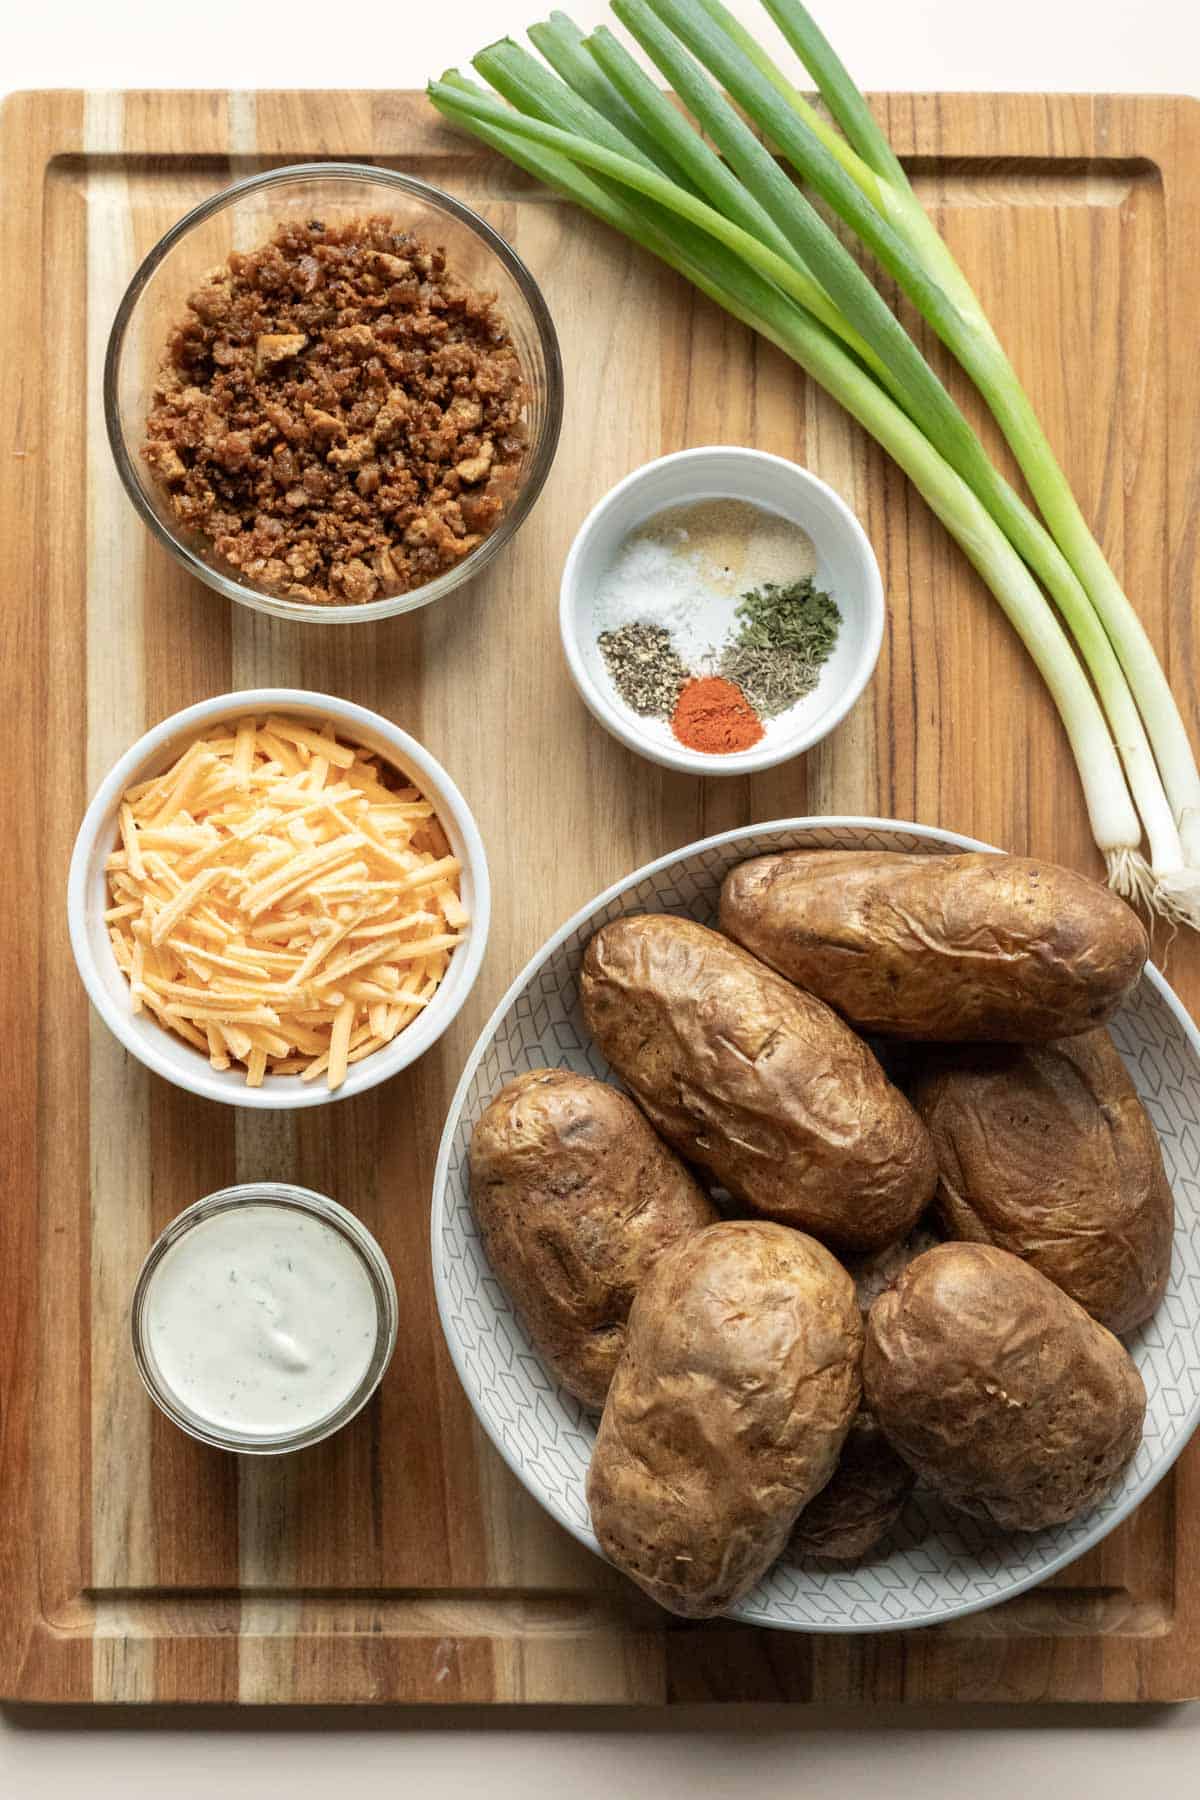 The four main ingredients needed for potato skins plus a few seasonings.